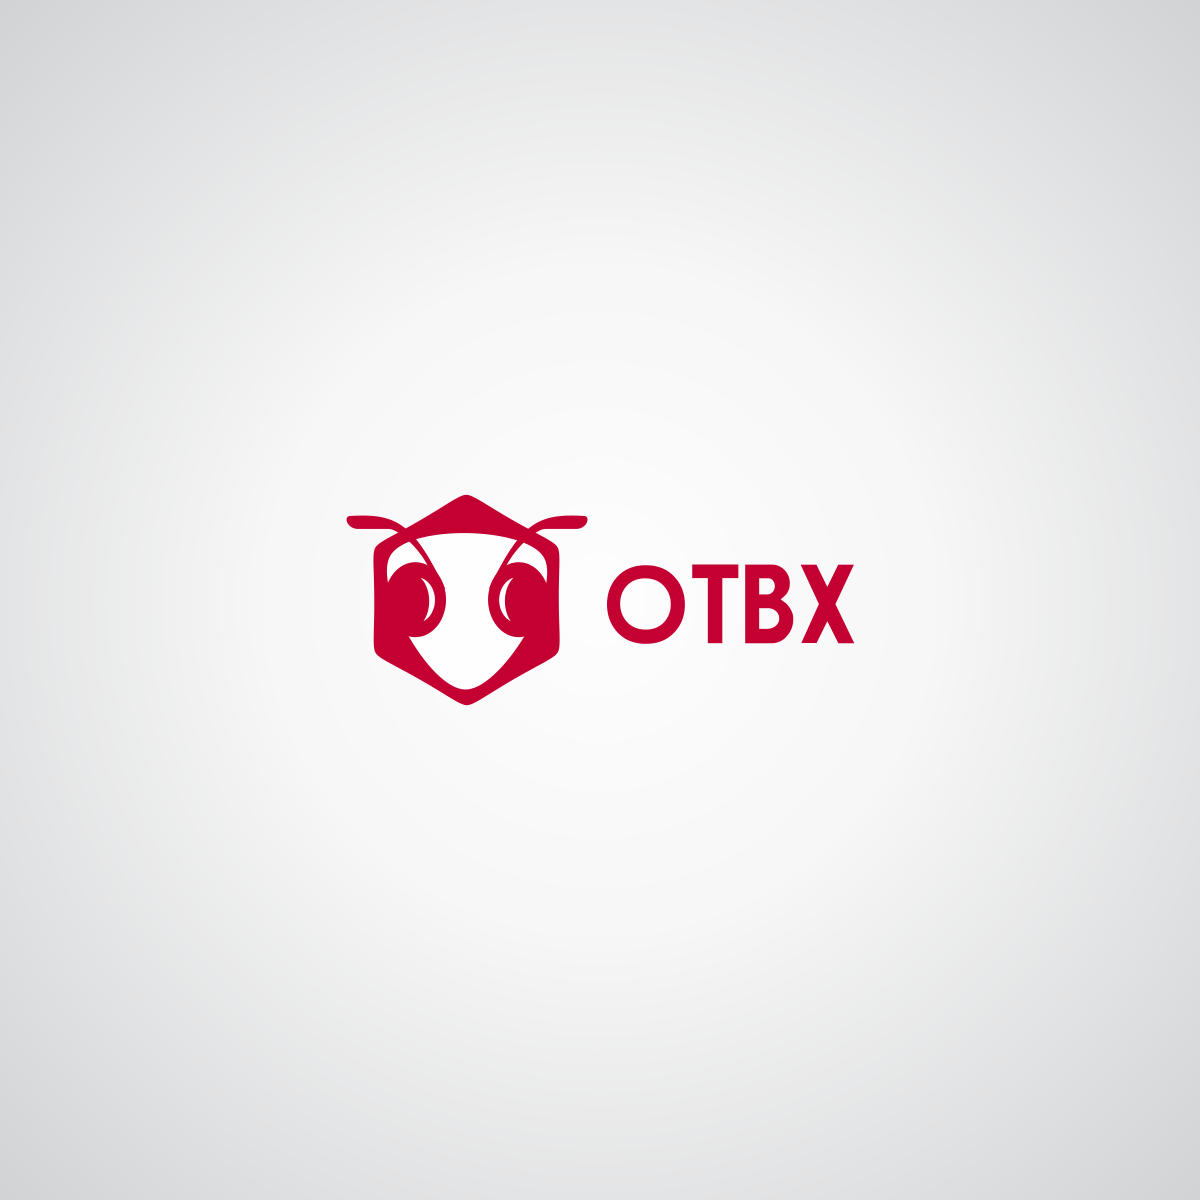 BX Red a Logo - Modern, Bold, It Company Logo Design for OTBx and Outside the bx